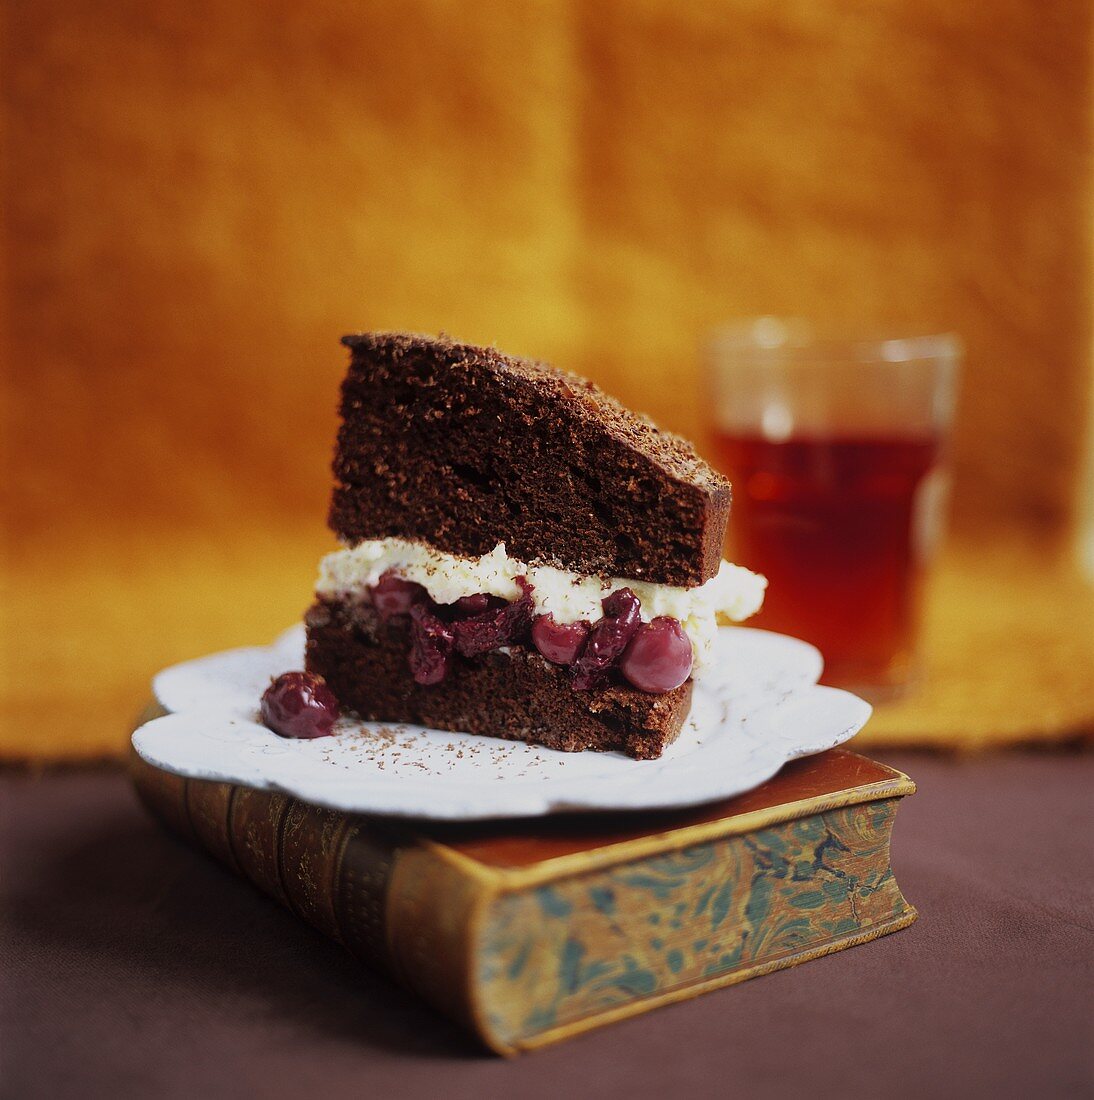 A piece of chocolate cherry cake standing on a book